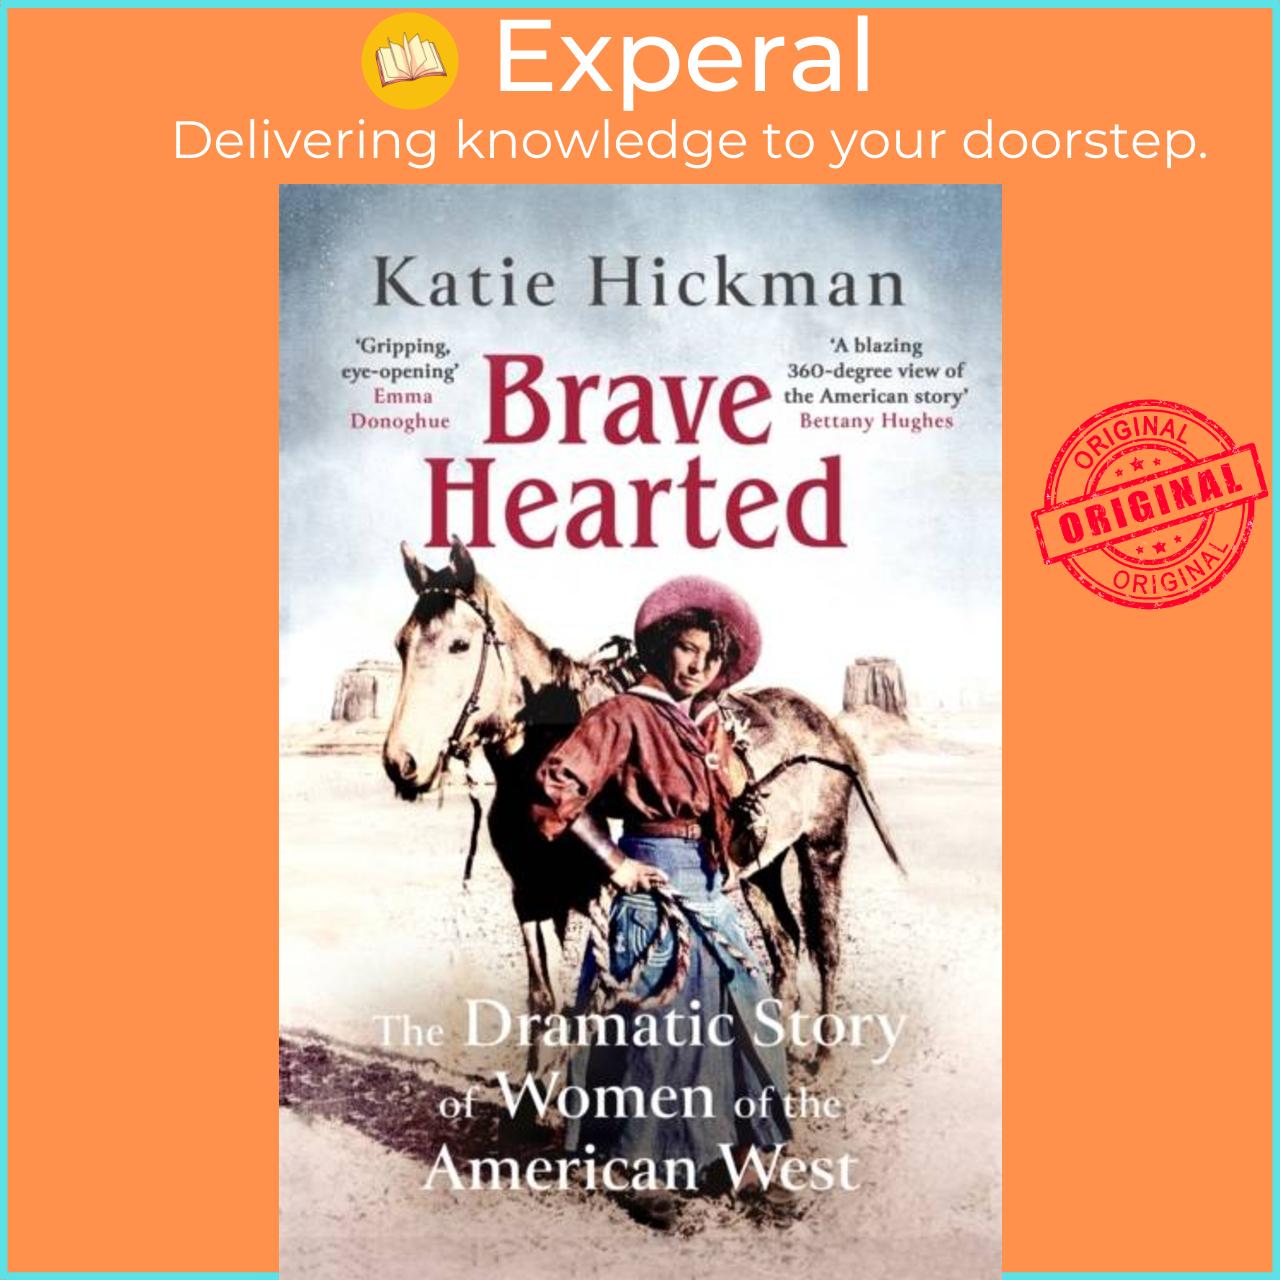 Sách - Brave Hearted - The Dramatic Story of Women of the American West by Katie Hickman (UK edition, hardcover)